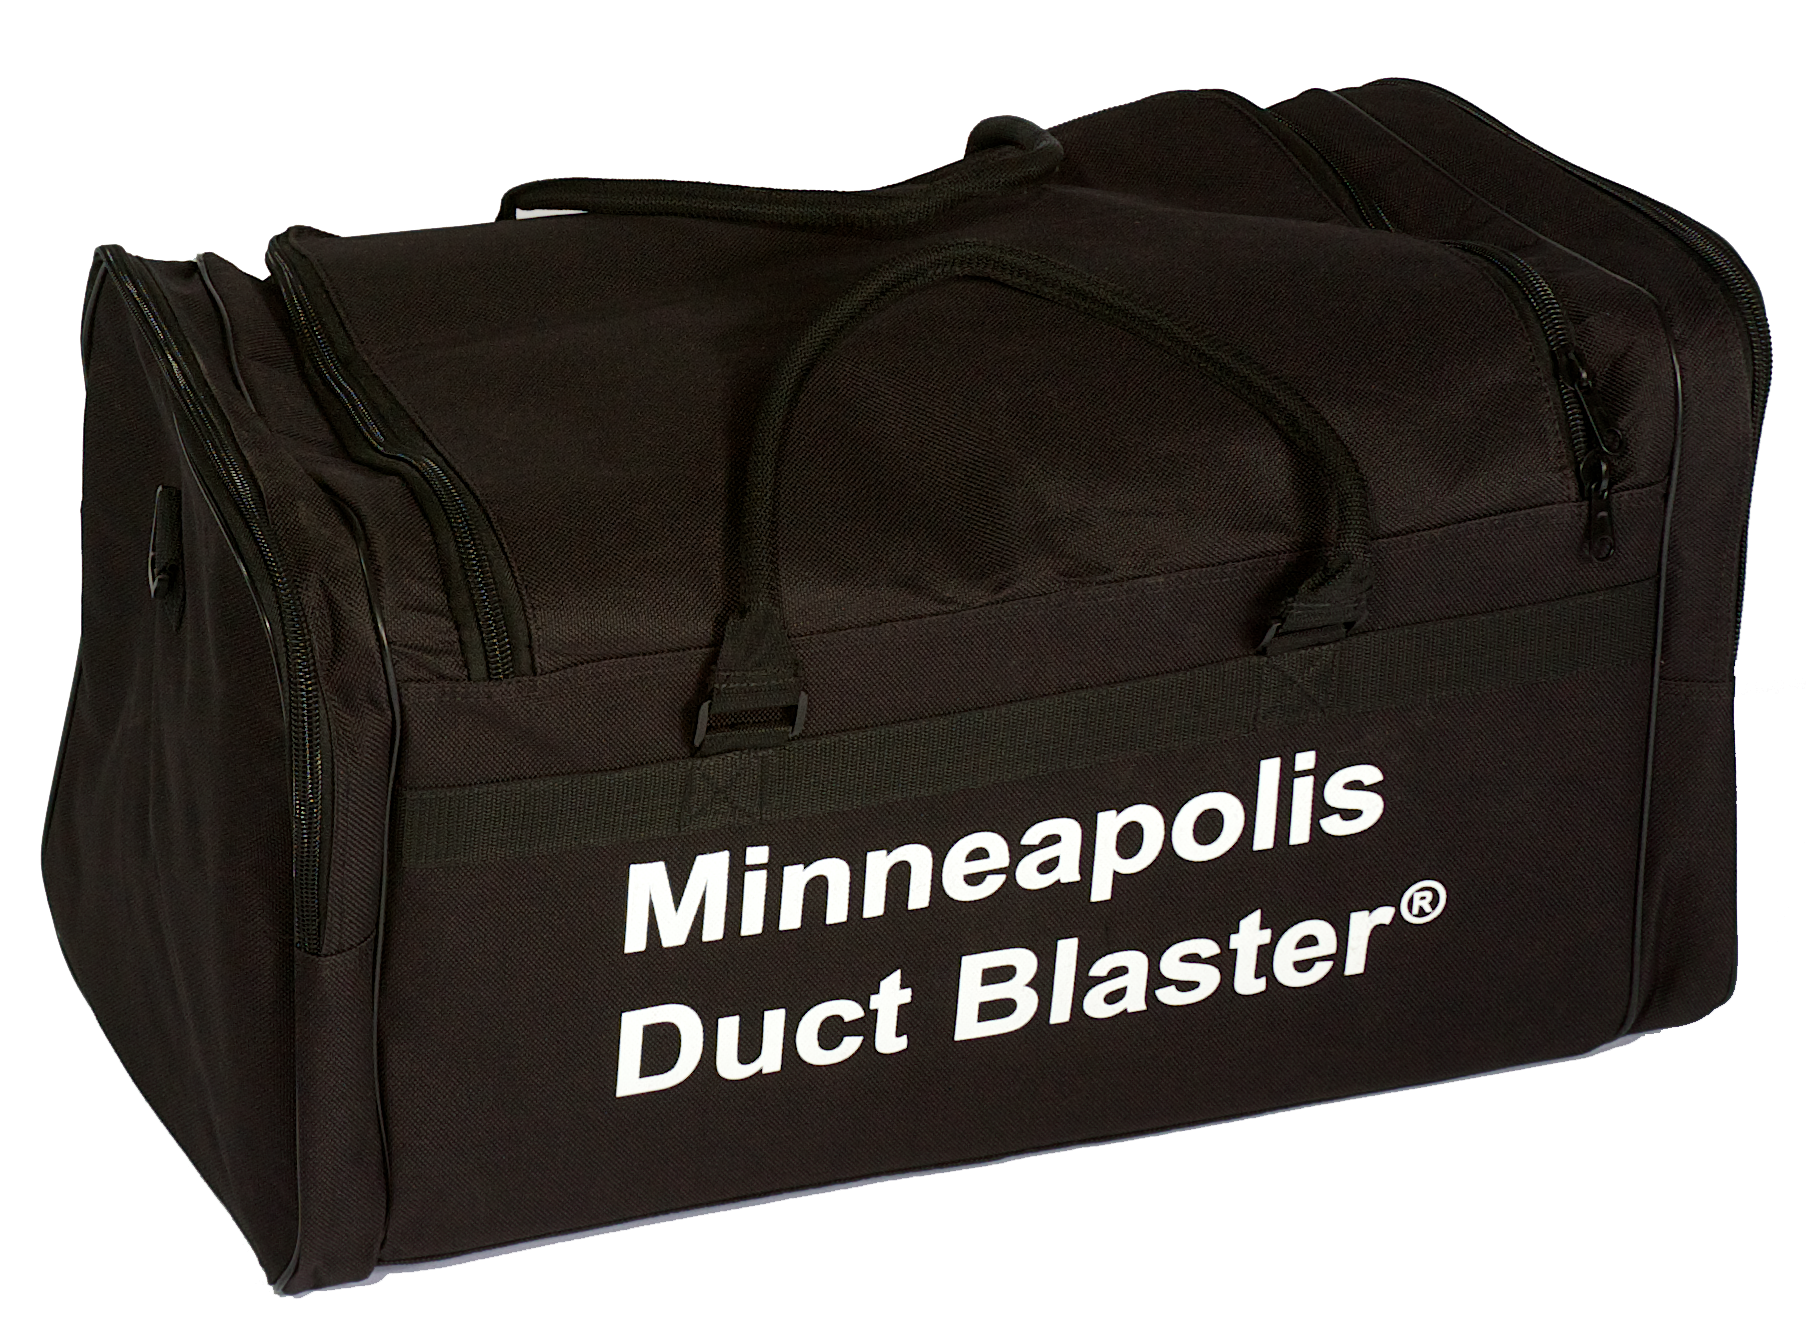 Duct Blaster® Carrying Case Image